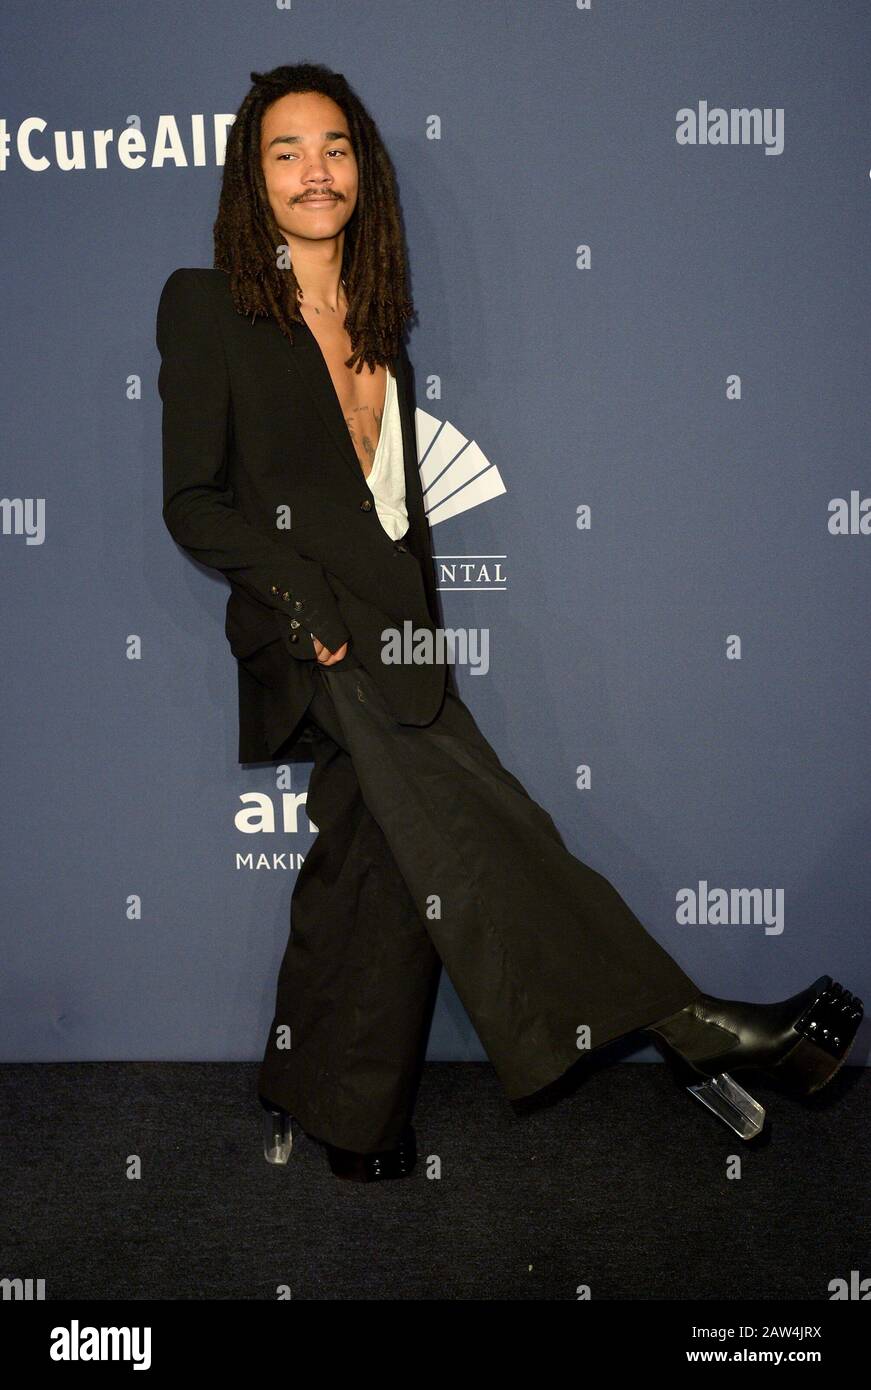 New York, NY, USA. 5th Feb, 2020. Luka Sabbat at arrivals for 22nd Annual amfAR New York Gala Benefit for AIDS Research, Cipriani Wall Street, New York, NY February 5, 2020. Credit: Kristin Callahan/Everett Collection/Alamy Live News Stock Photo